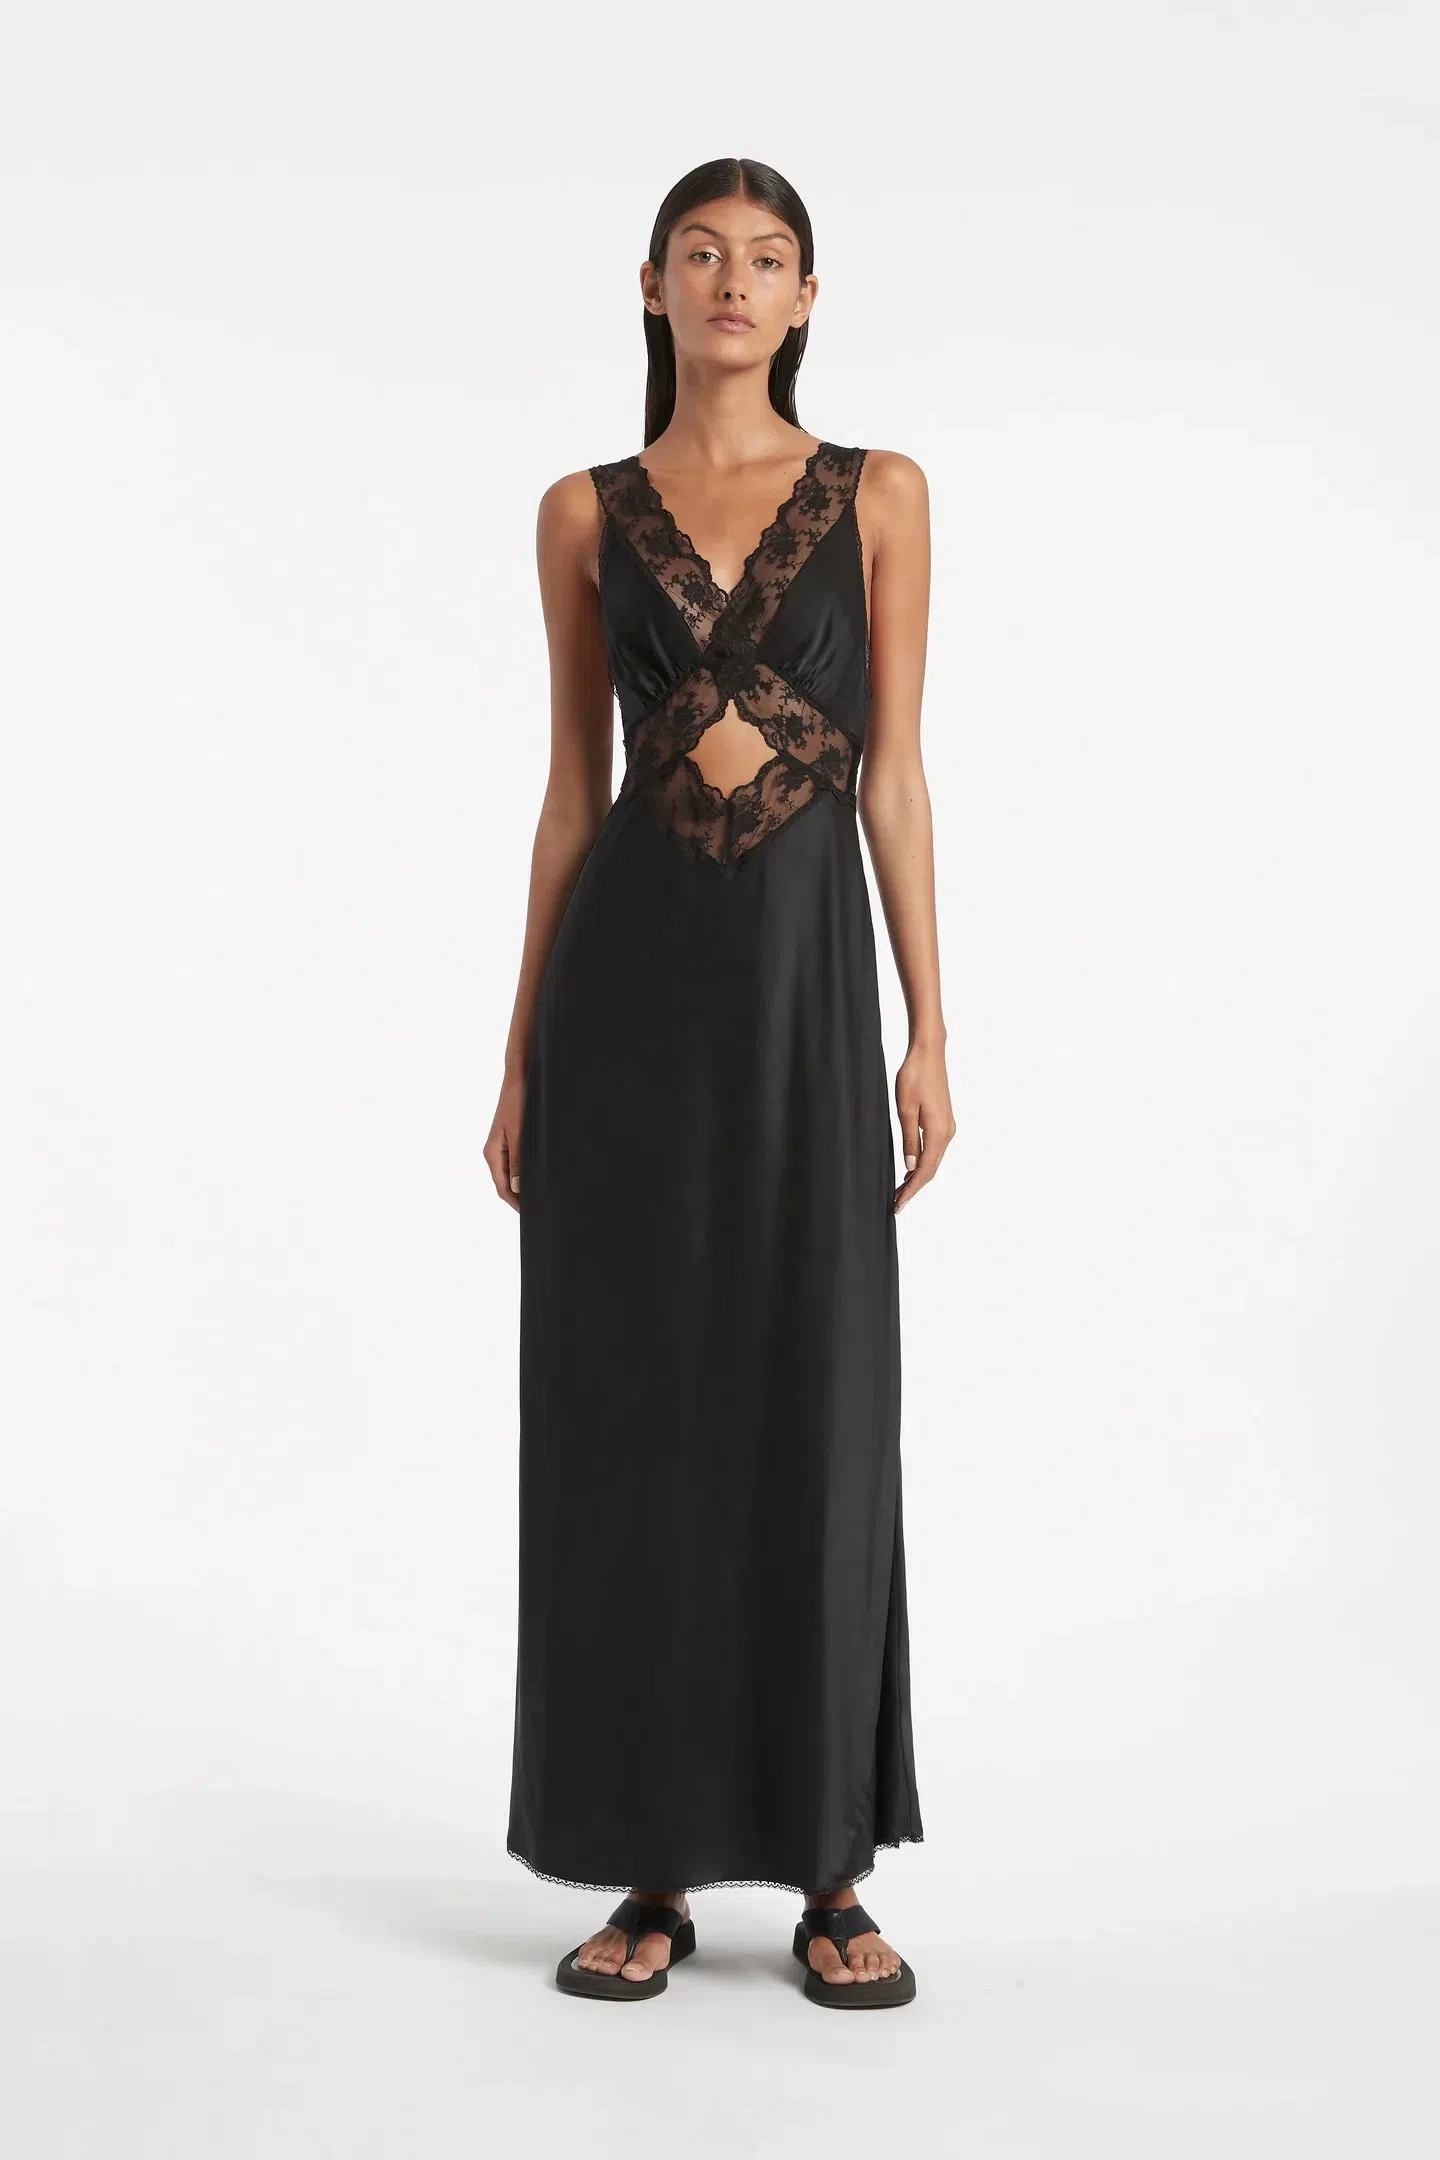 Sir the Label Aries Cut Out Lace Gown for hire.